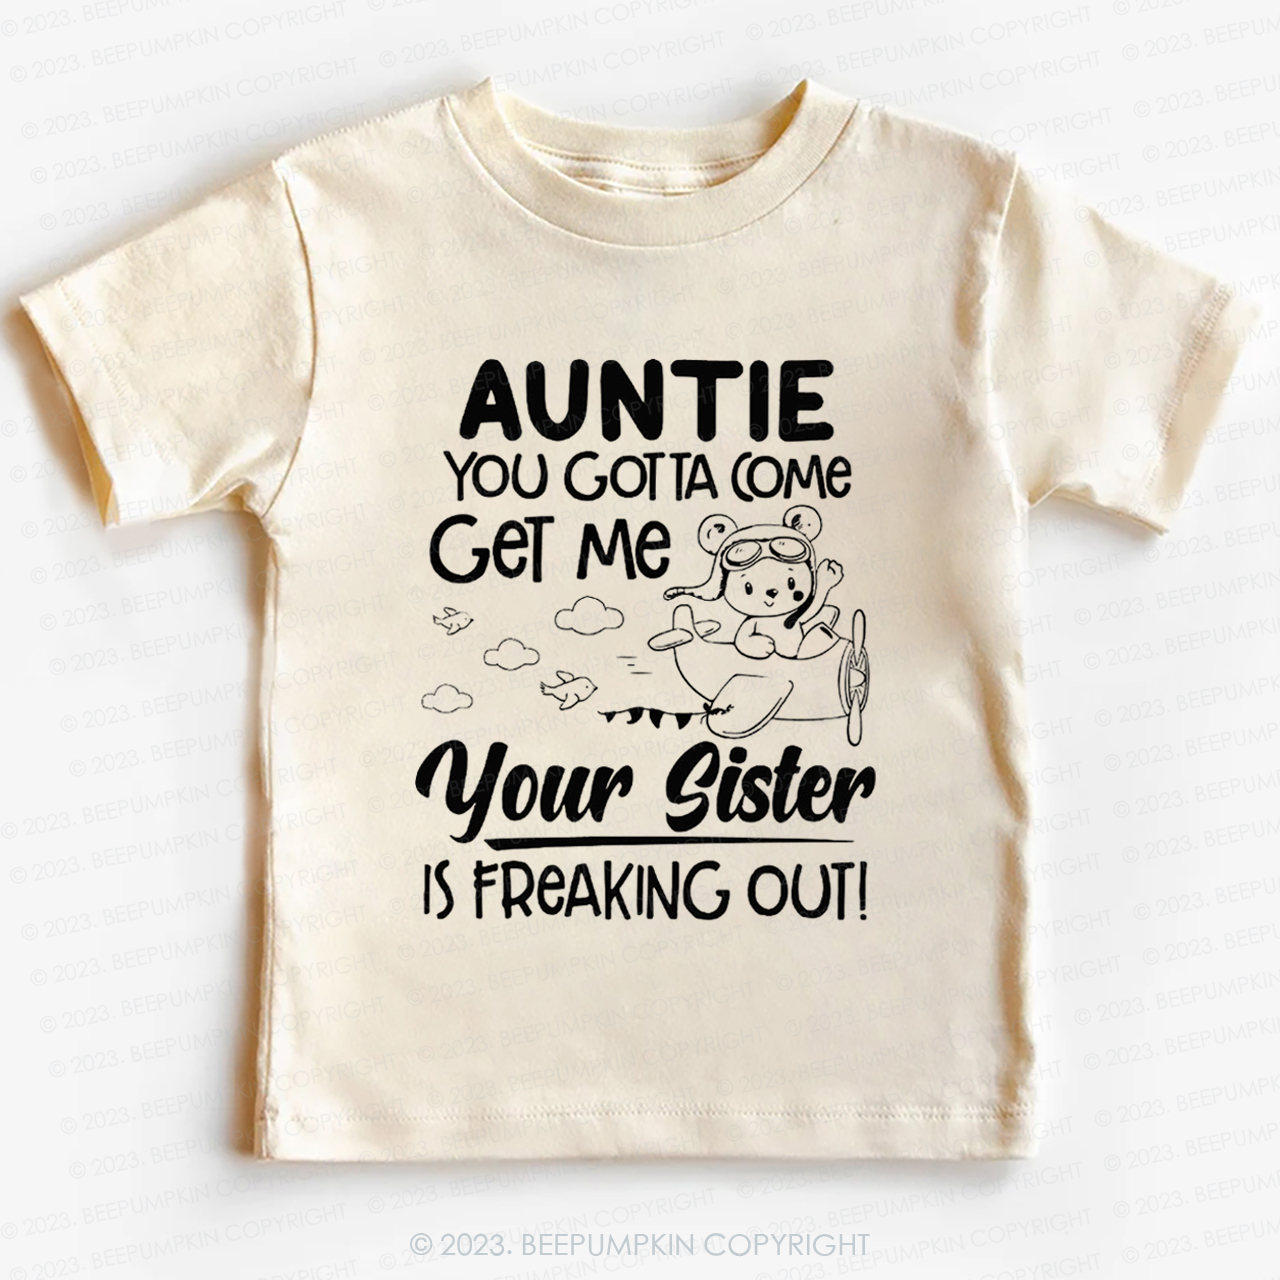 Auntie You Gotta Come Get Me Your Sister Is Freaking Out -Toddler Tees